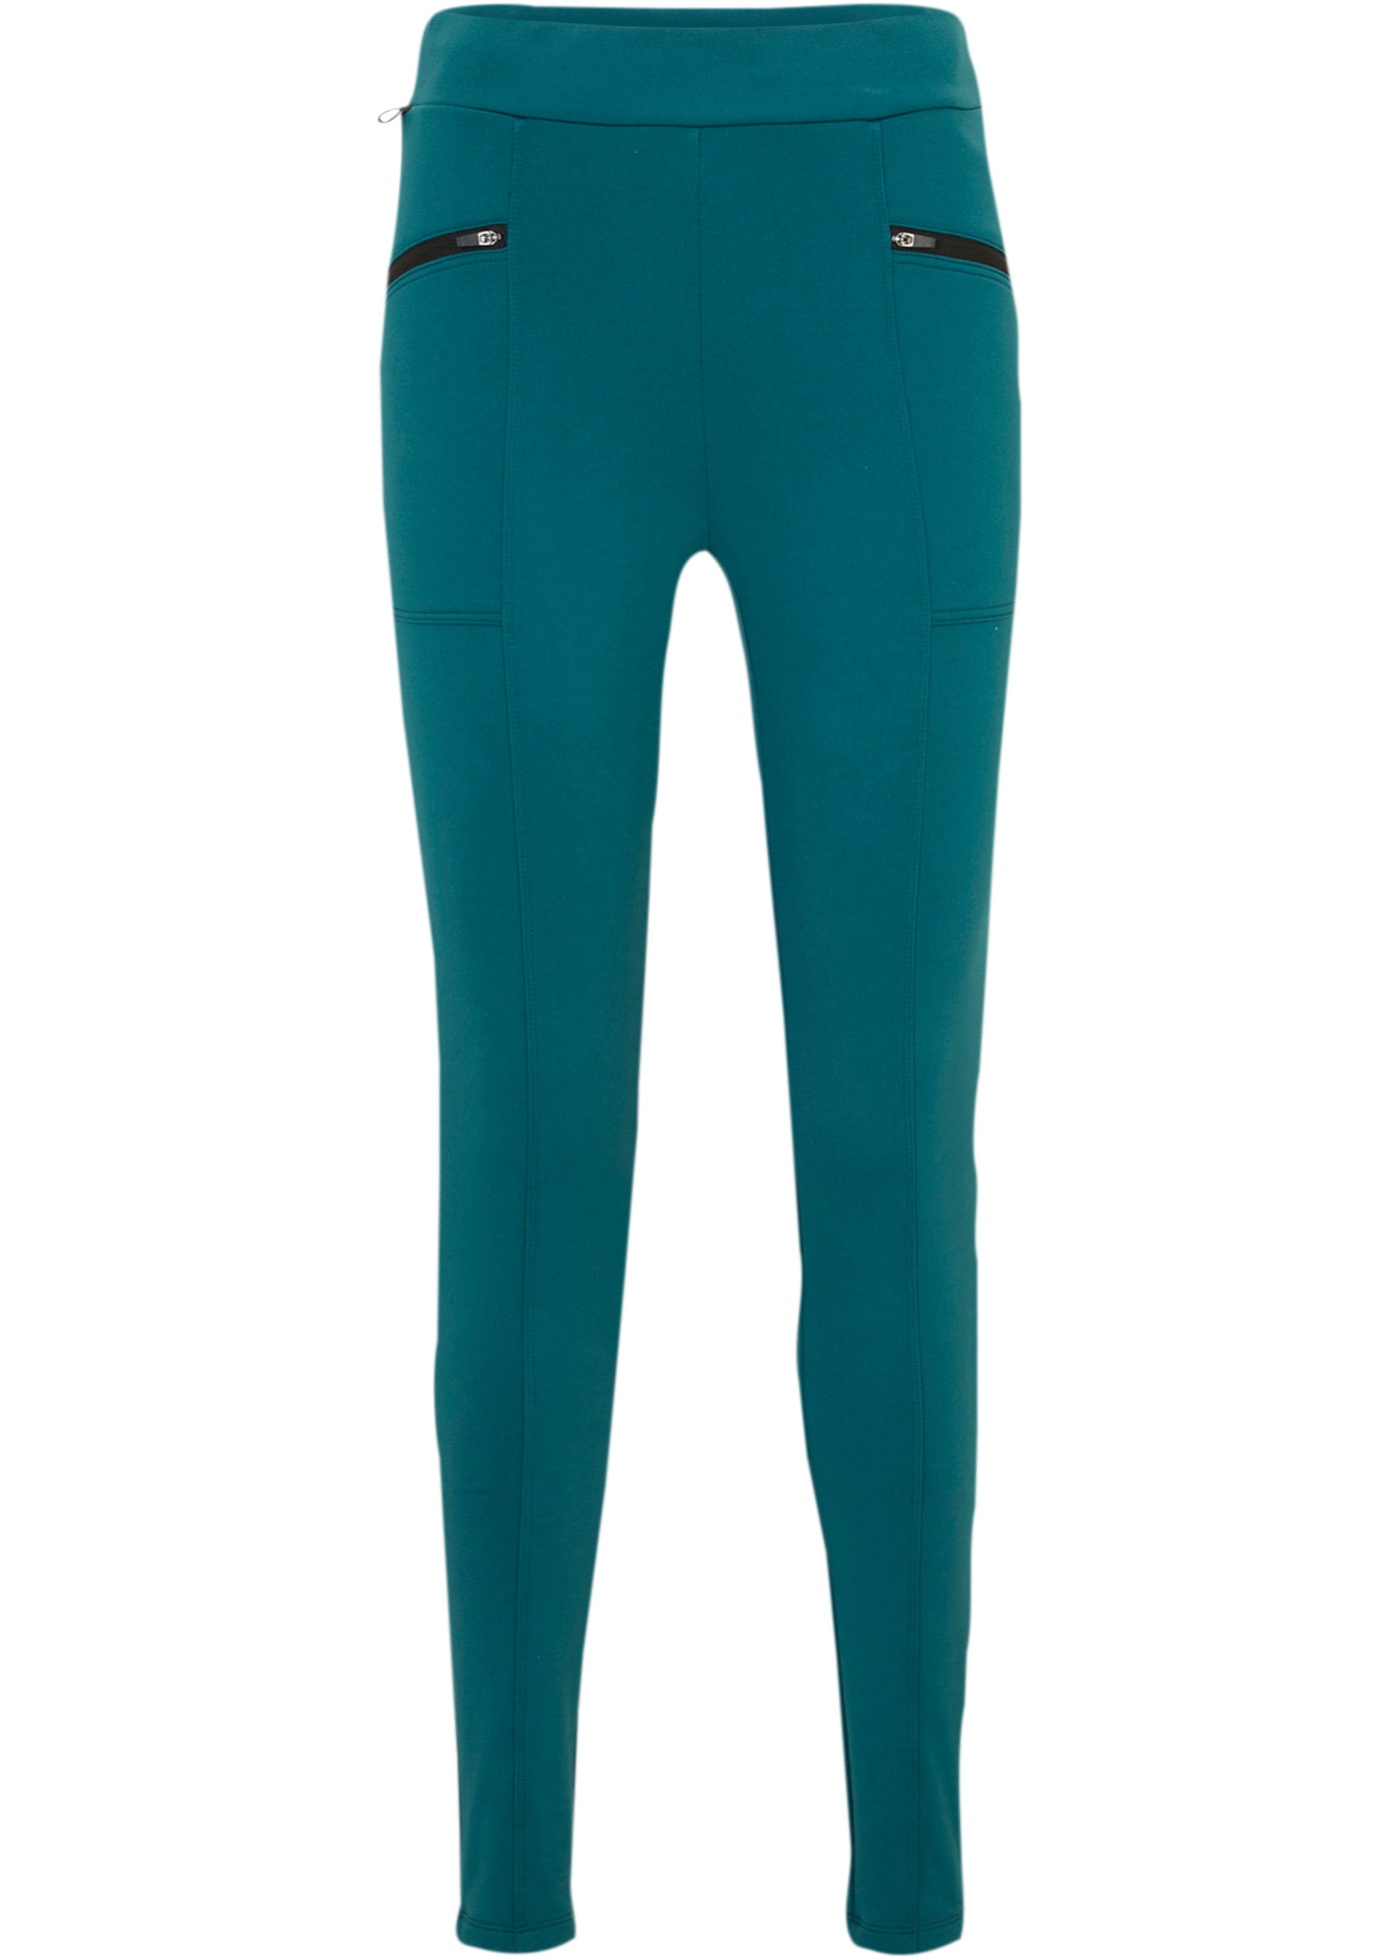 legging thermo outdoor, longueur cheville